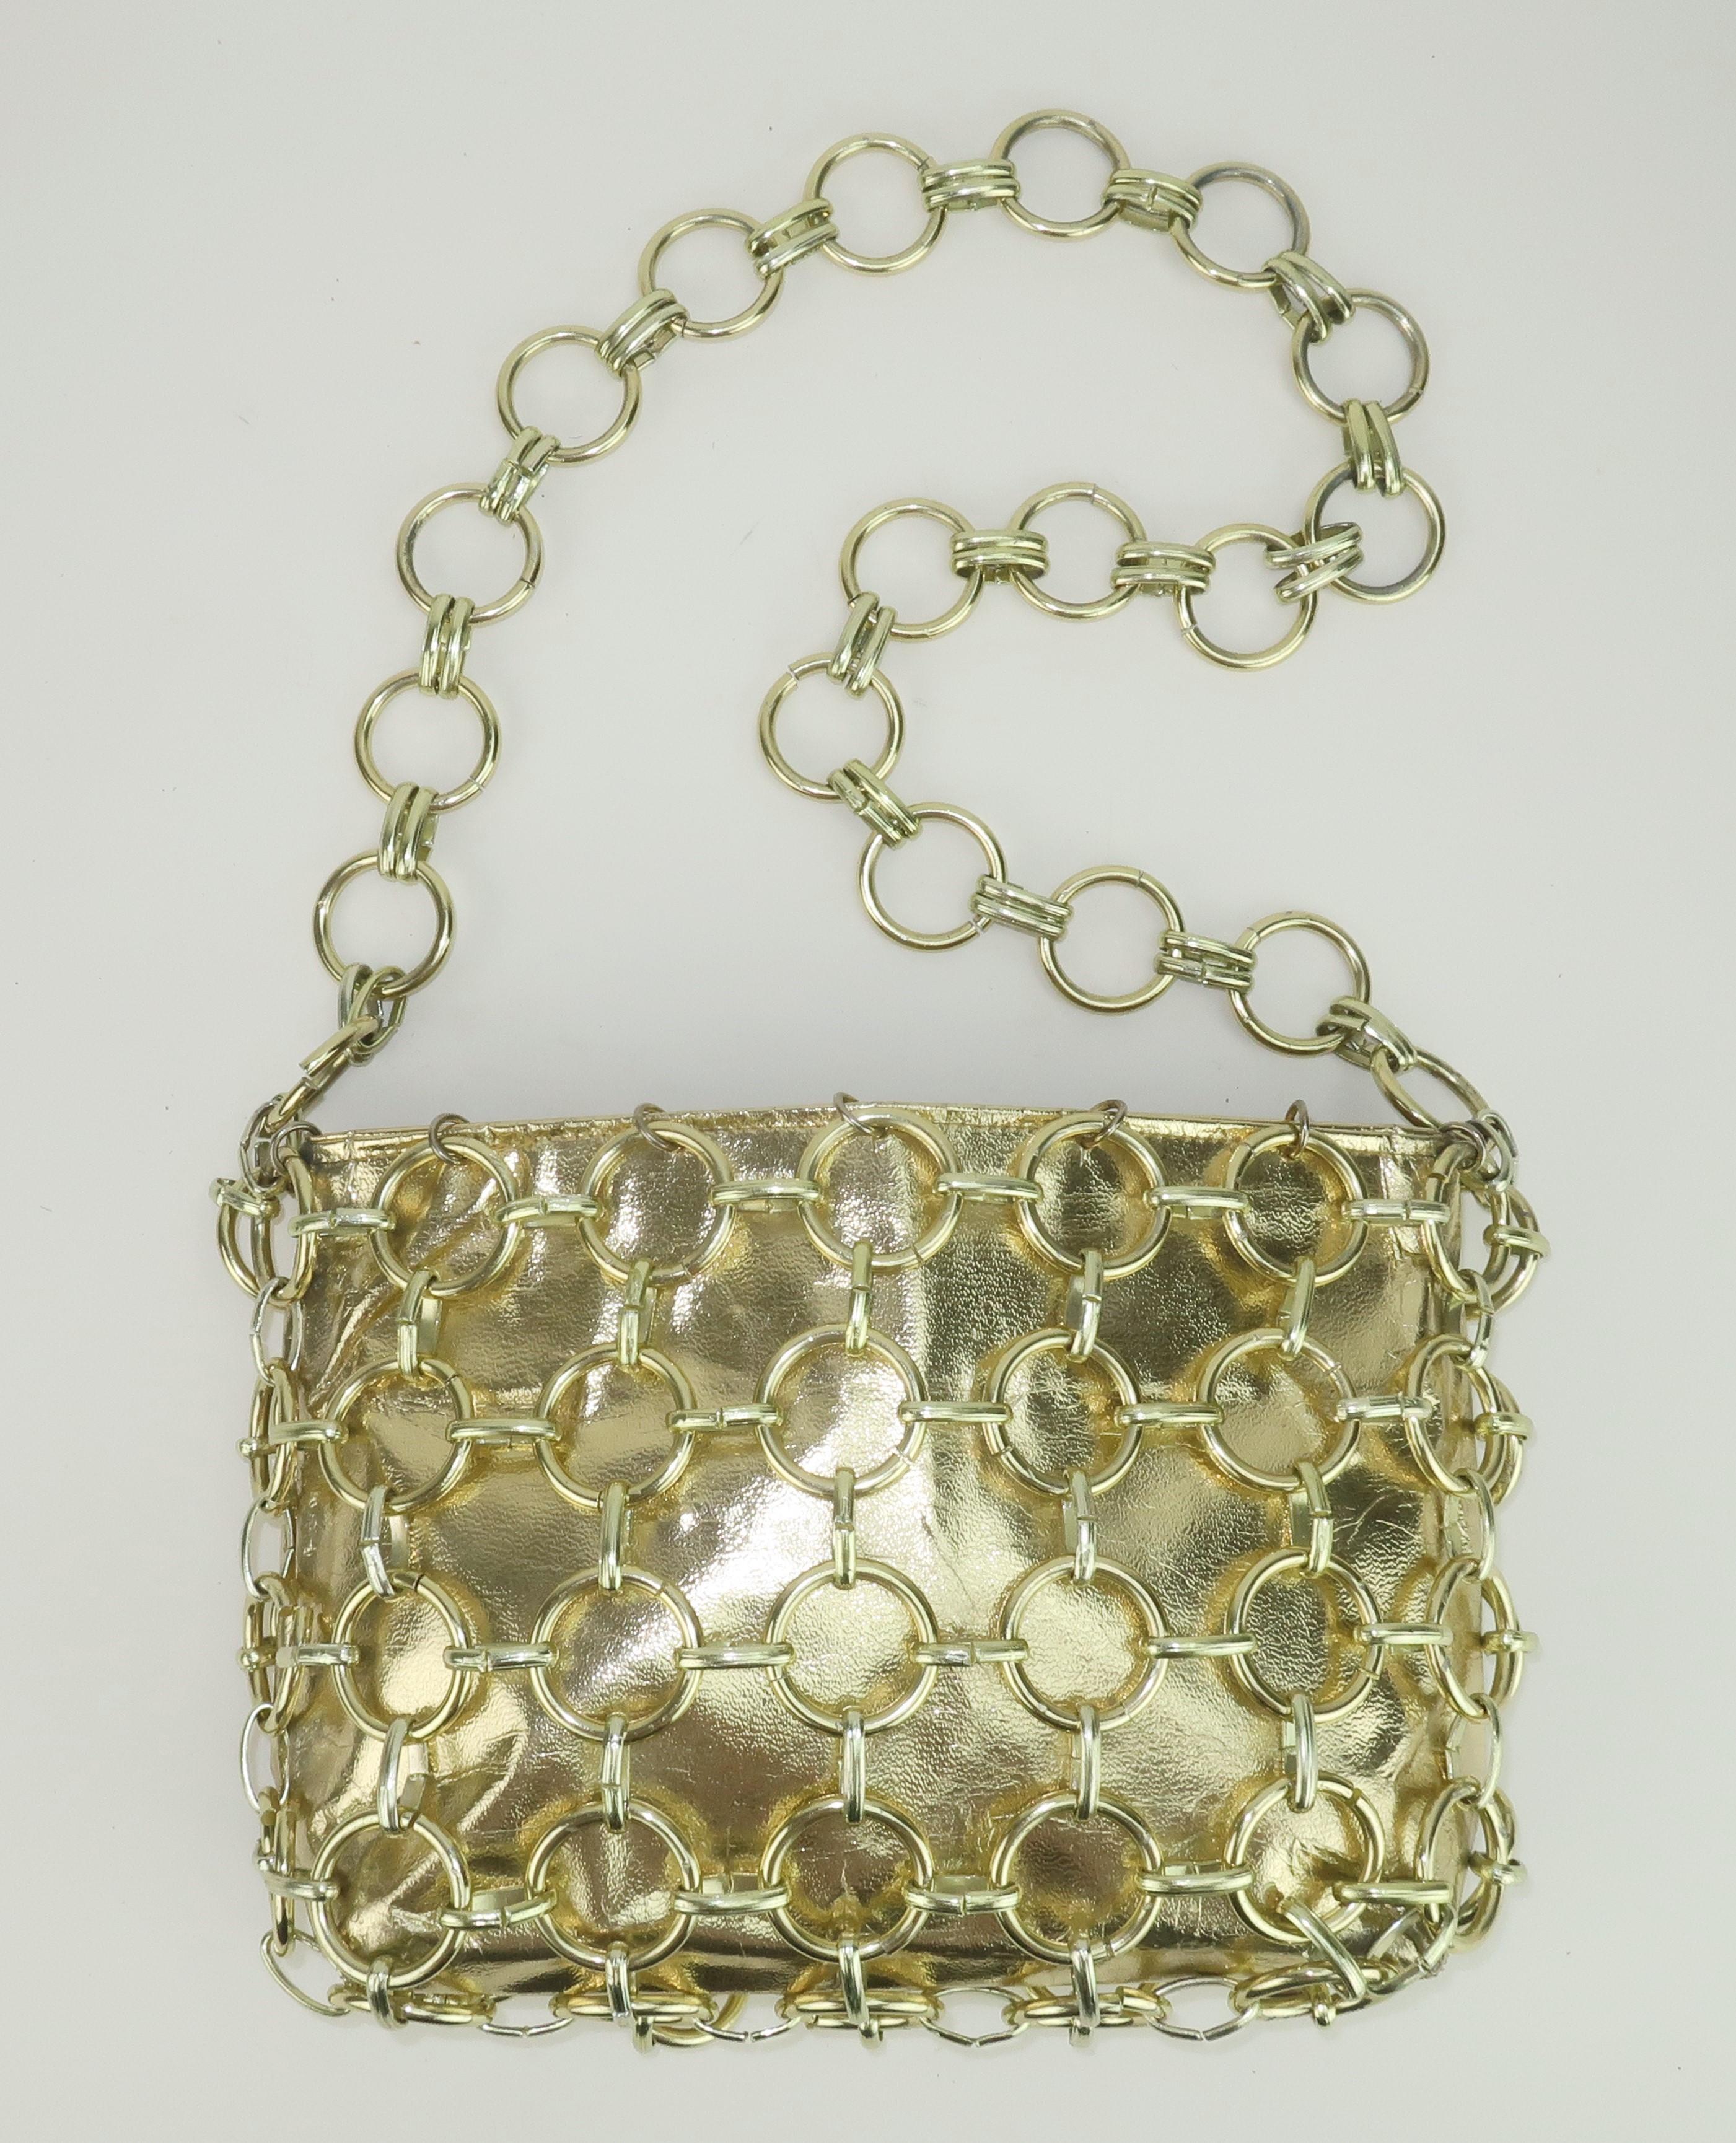 Get the Midas touch with the 1960's swinging style of a Magid gold chain link handbag.  The body of the handbag is a gold vinyl, with a leather look, completely caged with rings.  The interior offers two generous open pockets and a center zippered